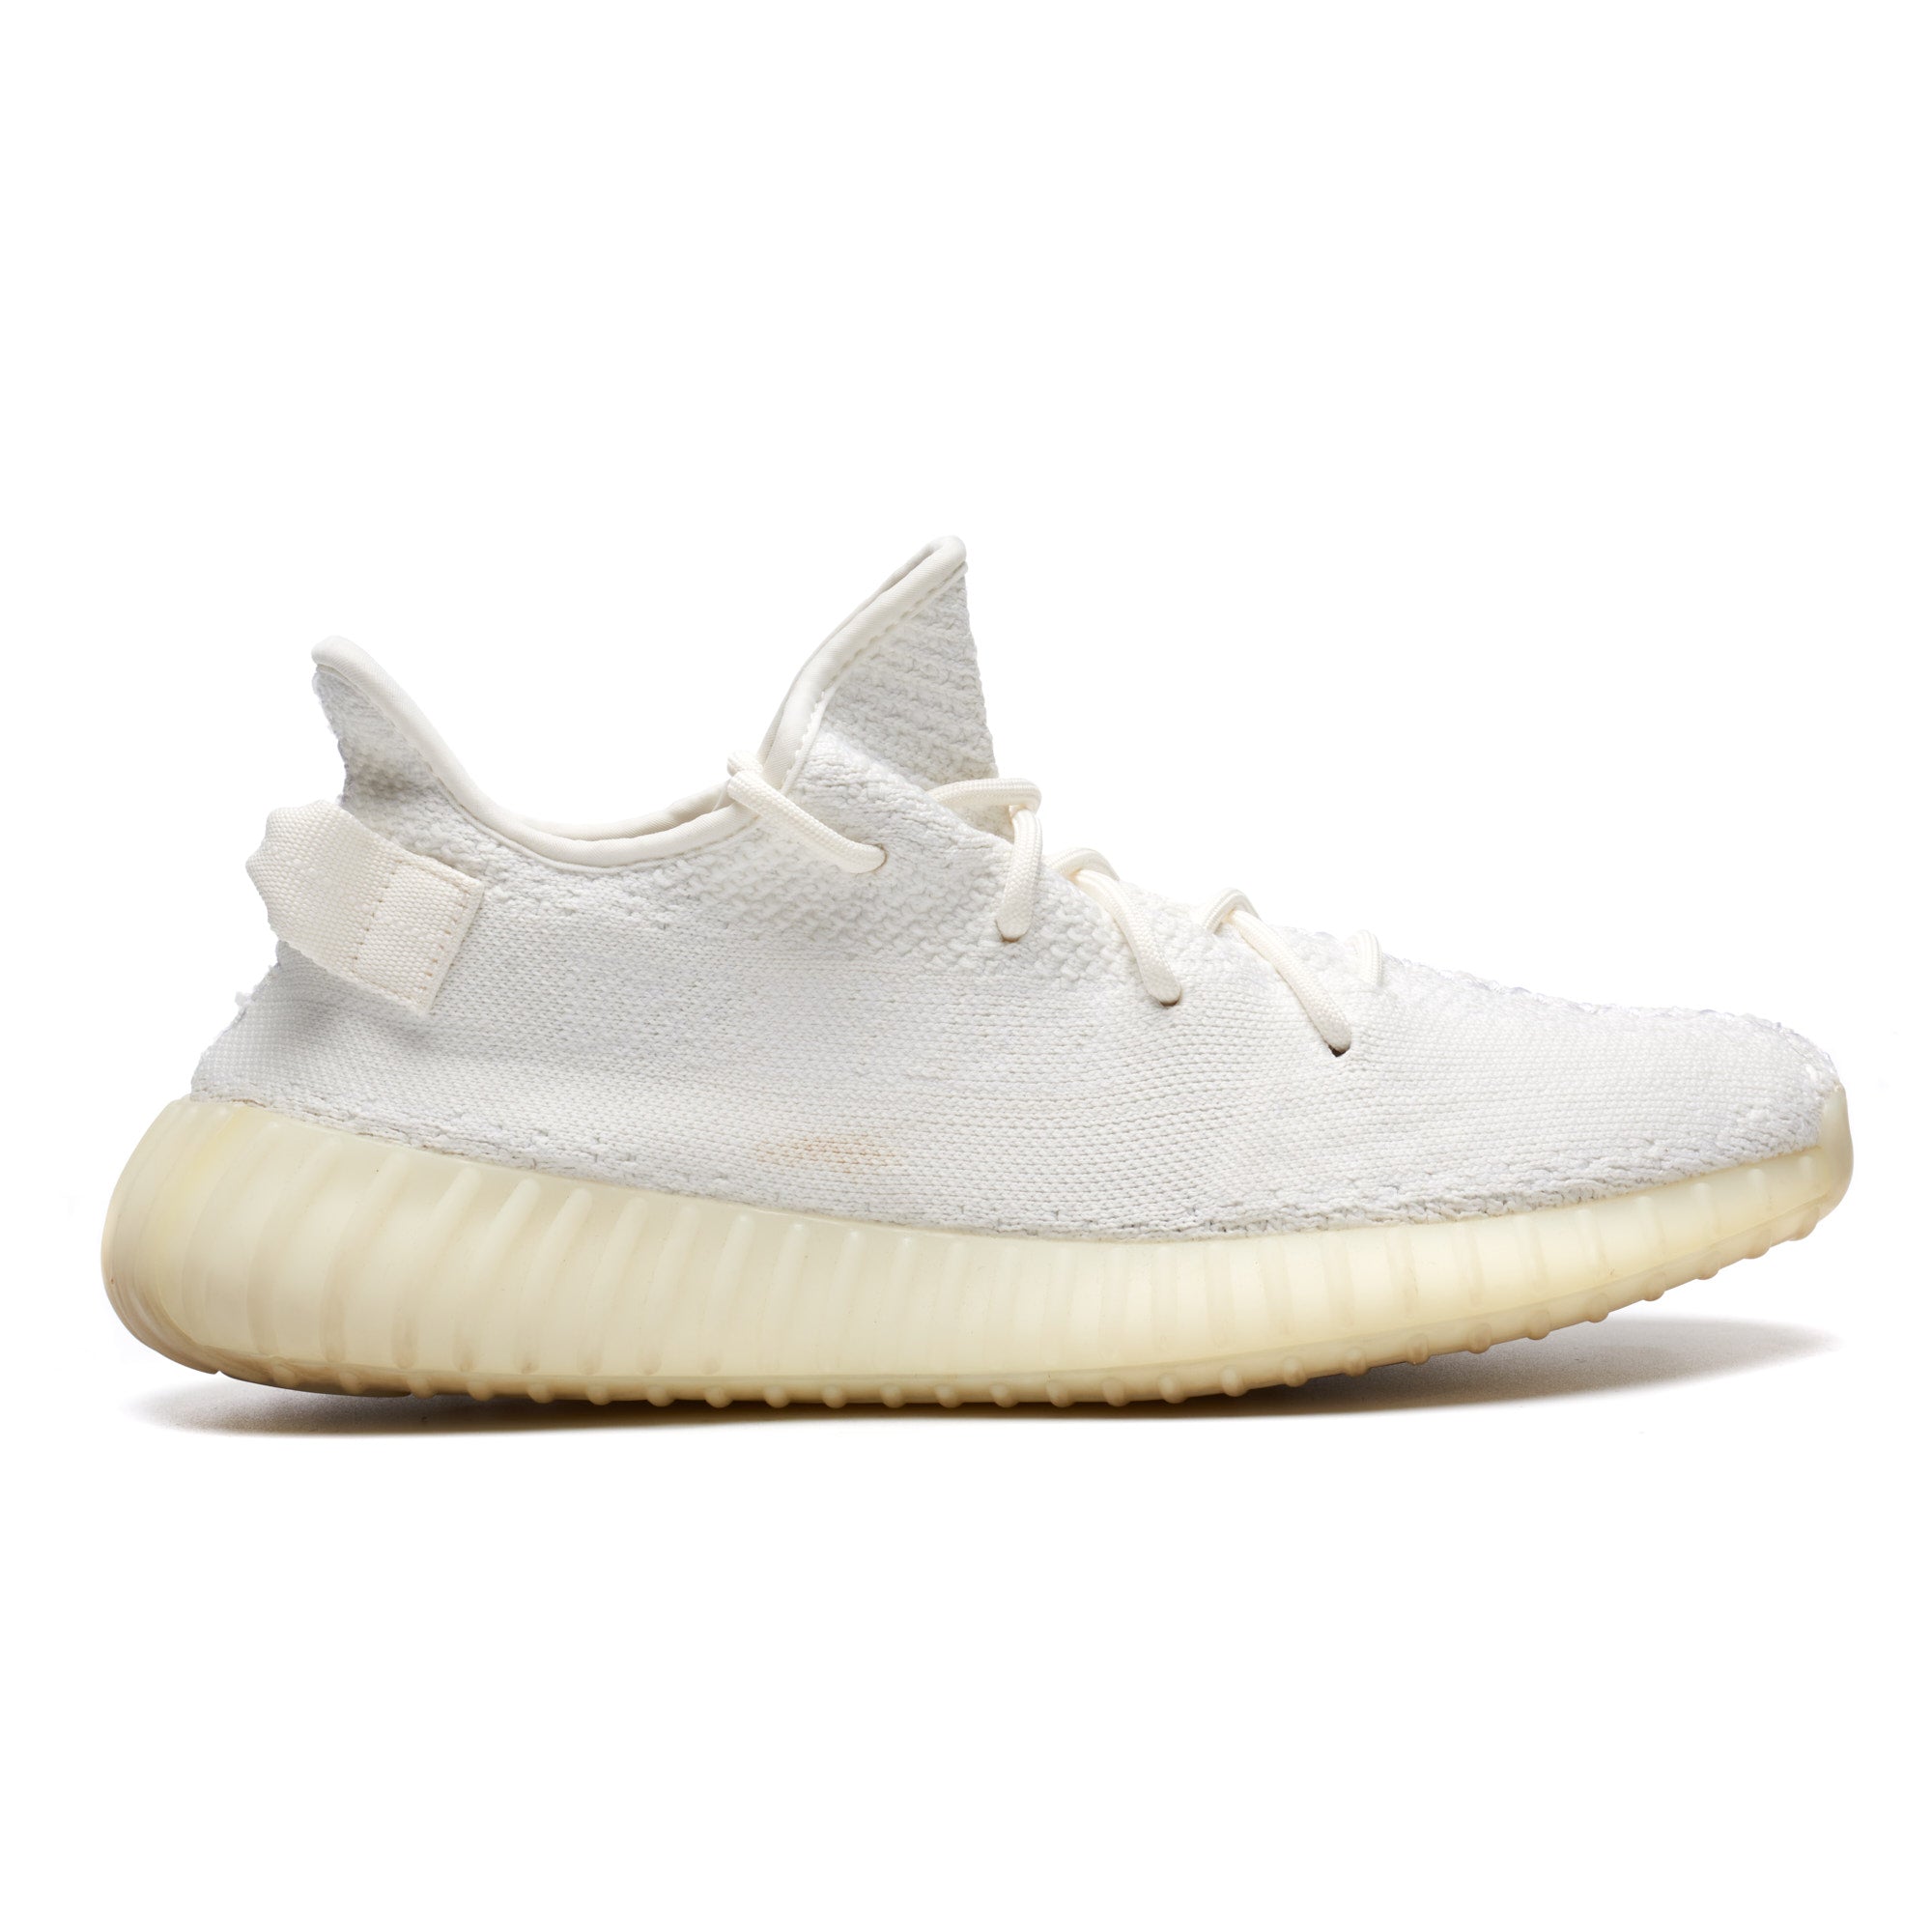 ADIDAS YEEZY BOOST 350 V2 Cream White Sneakers Shoes UK 9.5 US – SARTORIALE